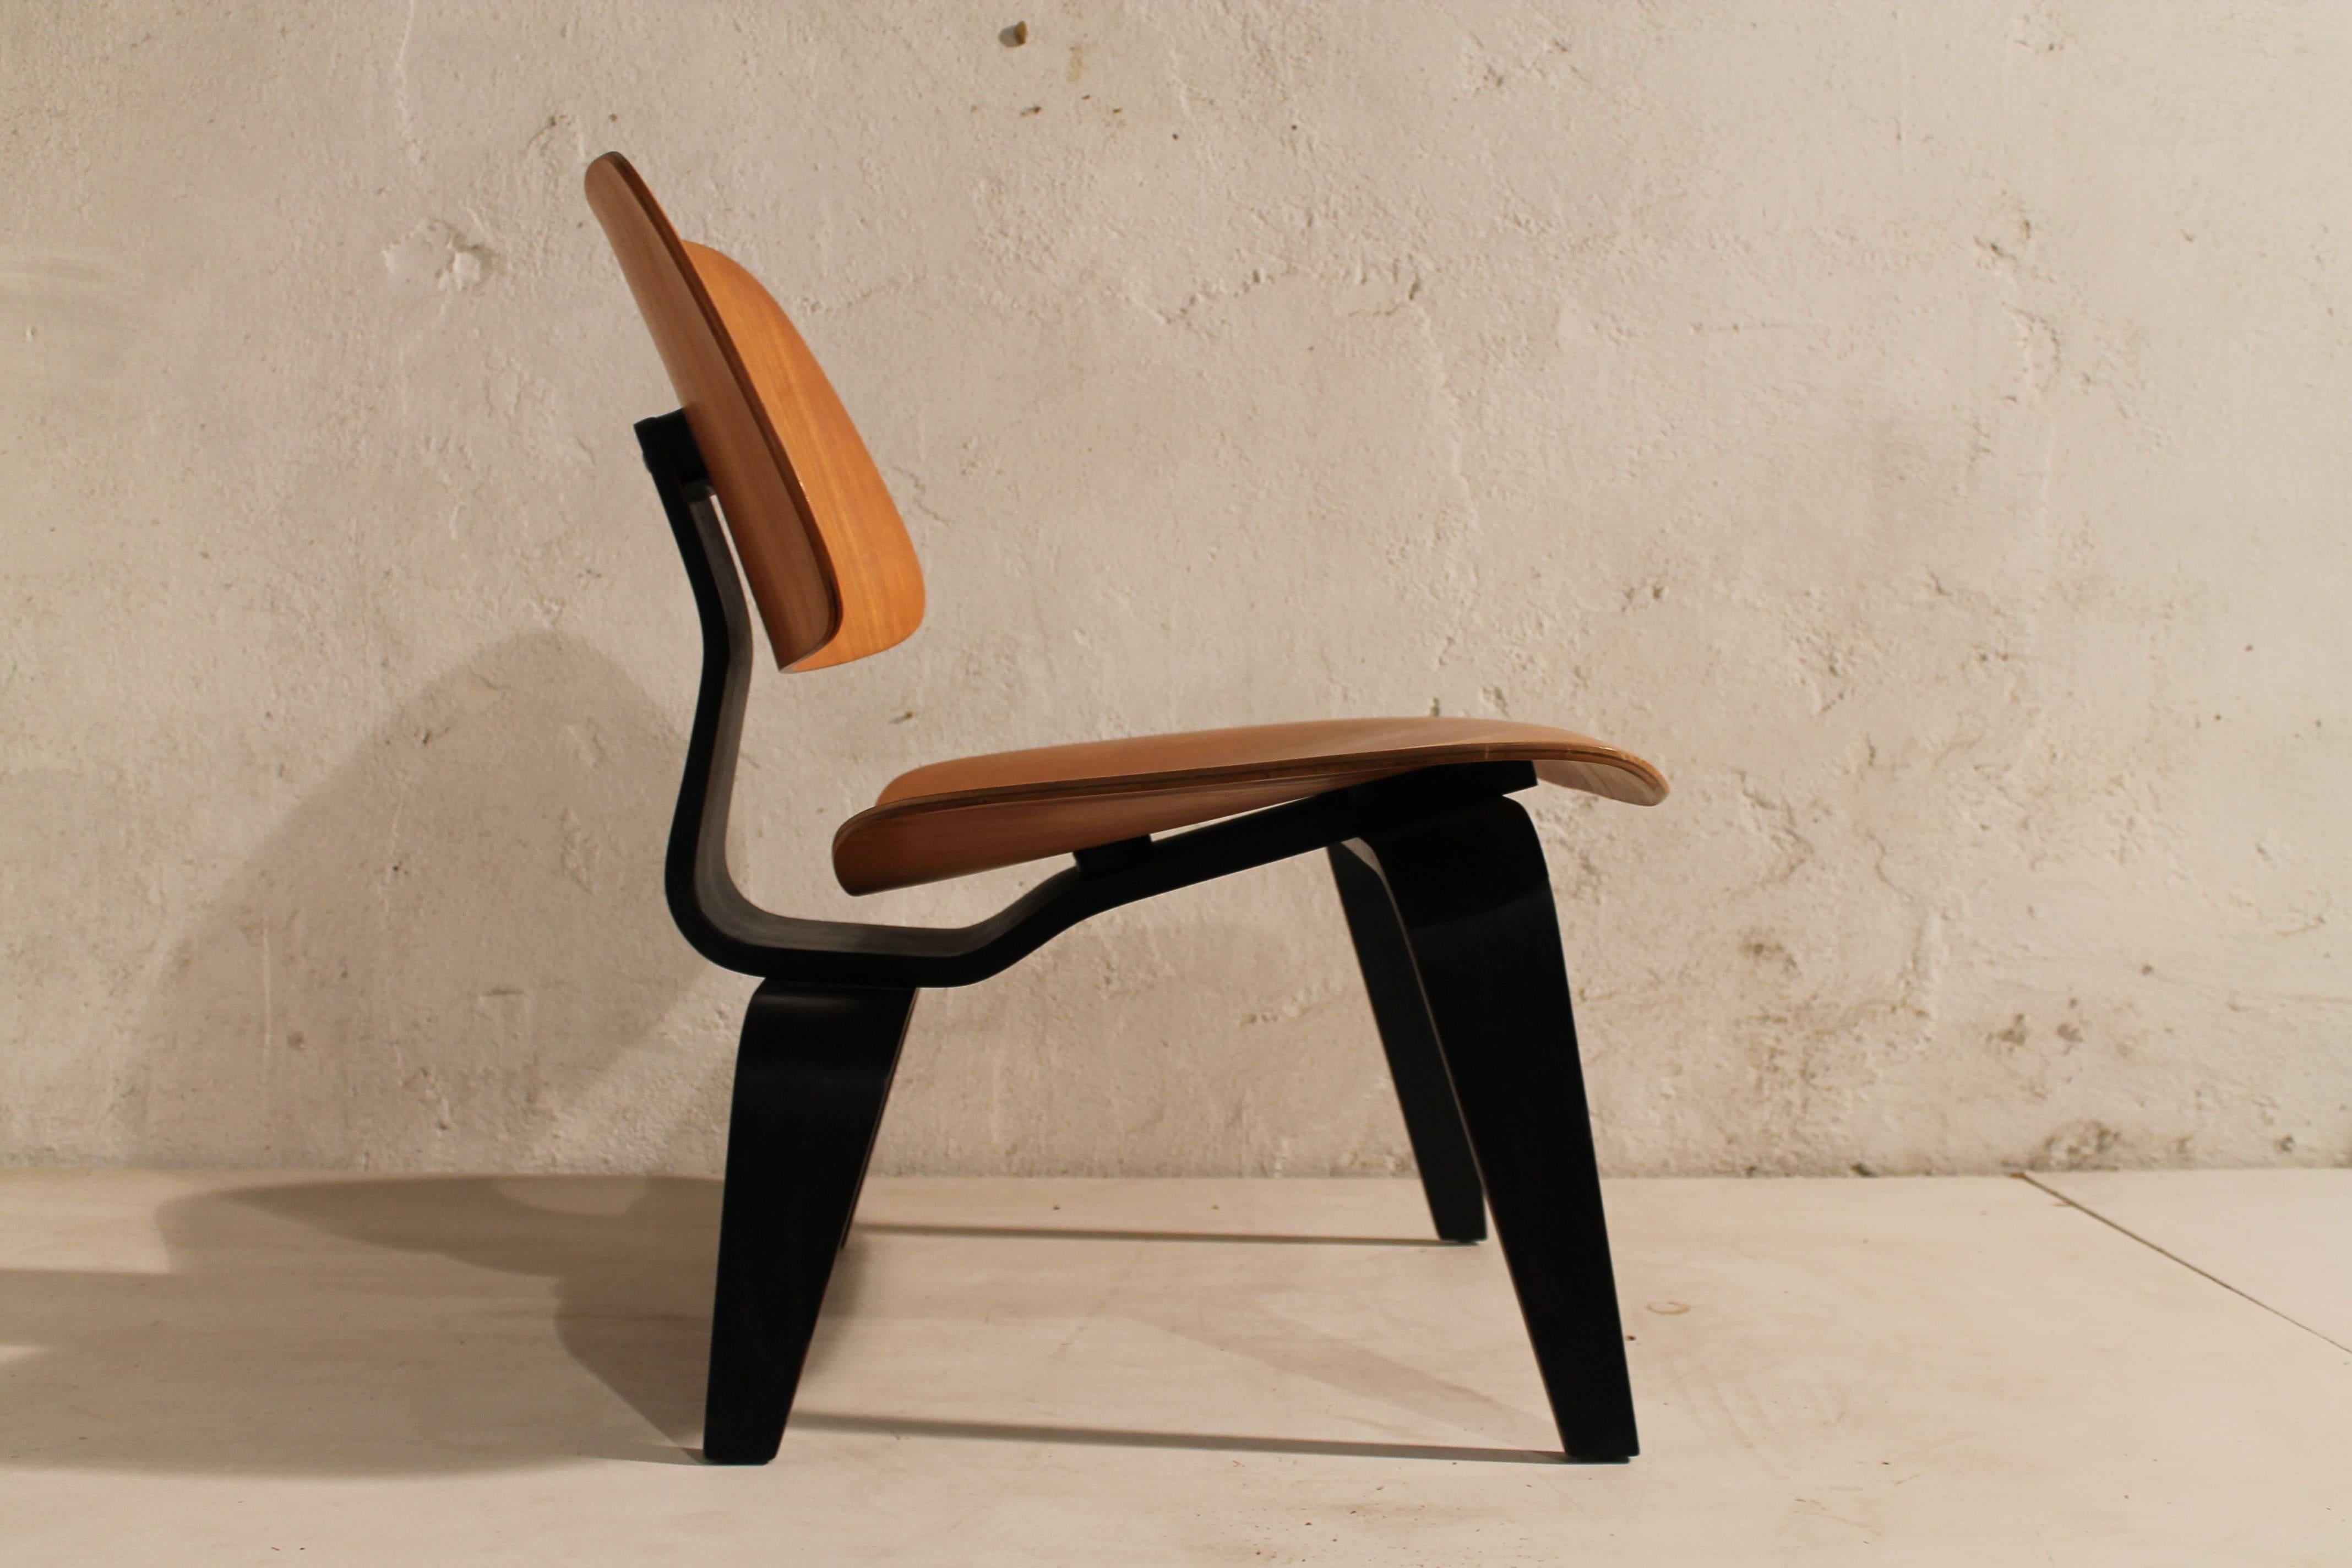 LCW chair by Eames for Evans, 1947, USA

good original condition 
with label.